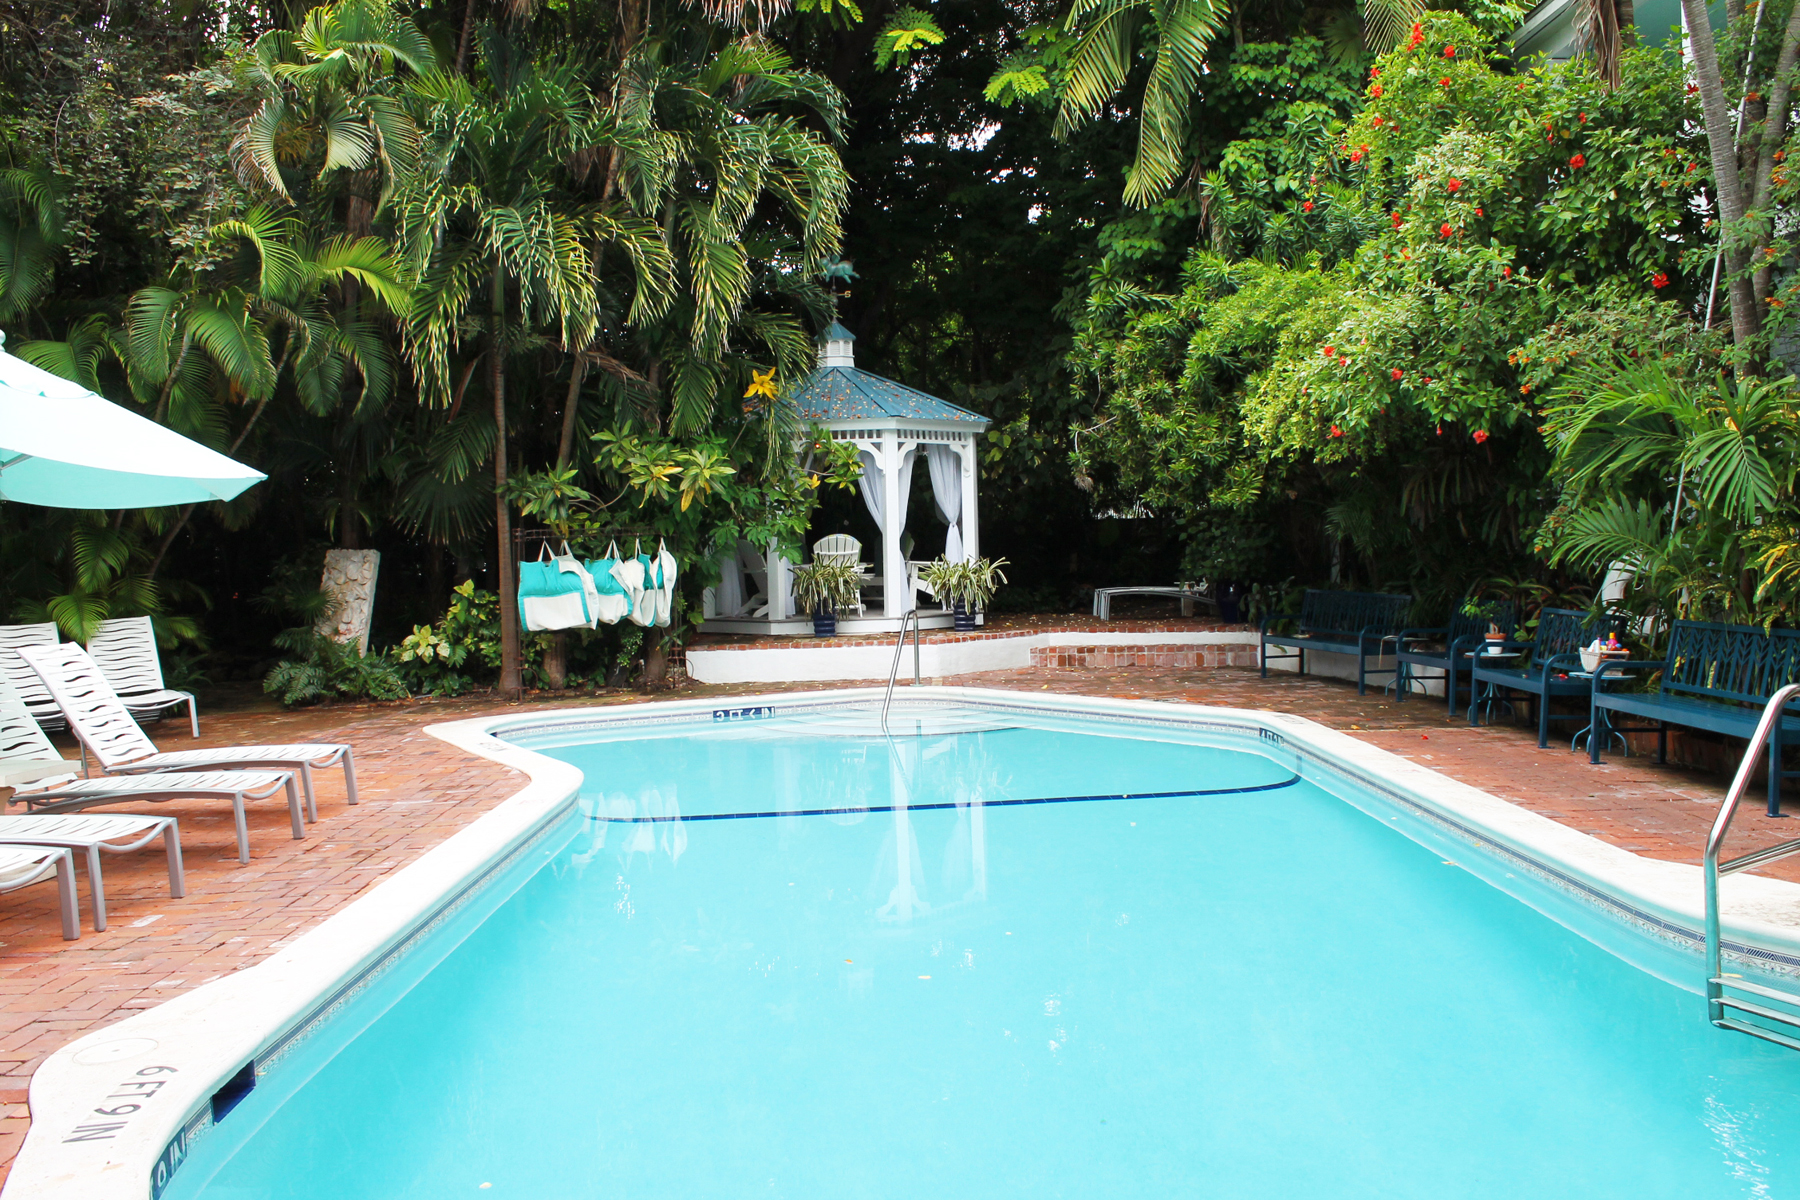 The Gardens Hotel In Key West Paradise Found